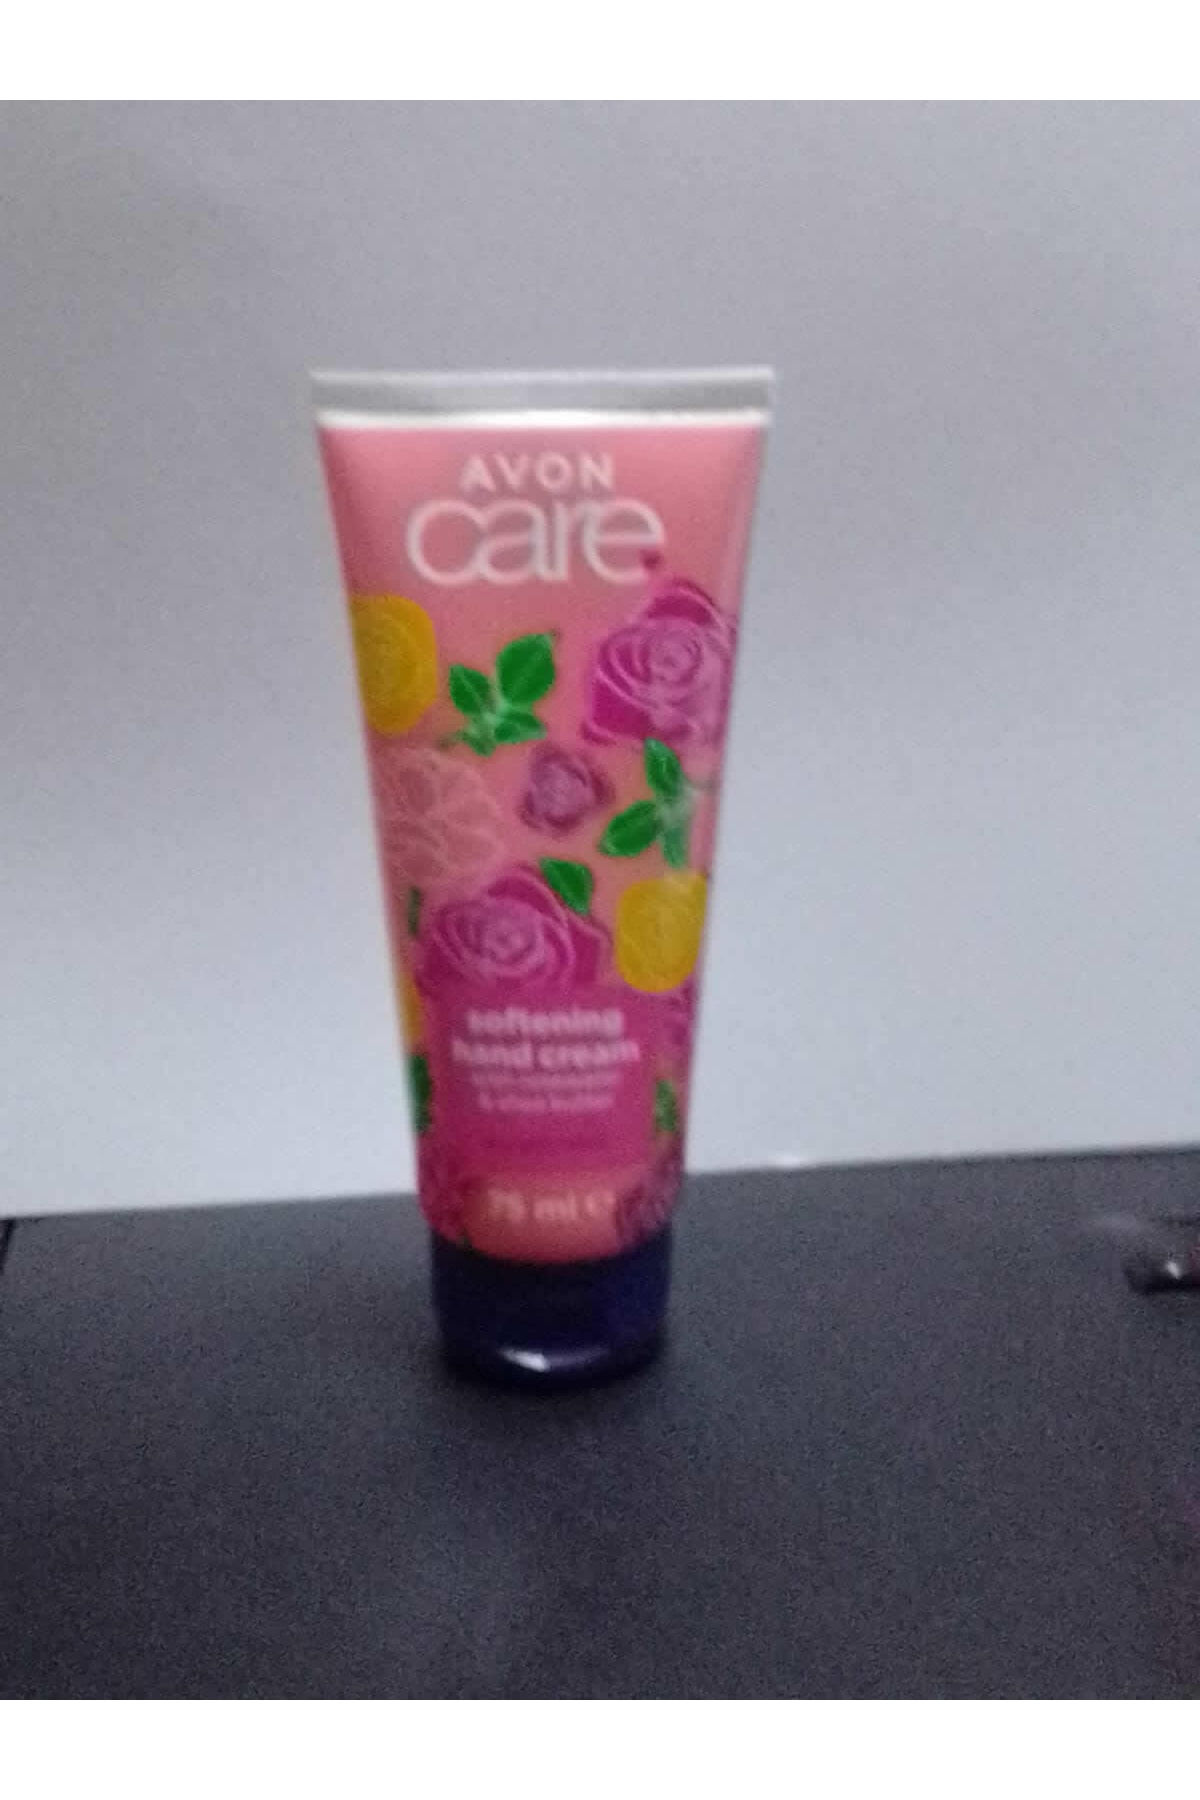 AVON Care Softhening Hand Cream With Rosewater And Shea Butter